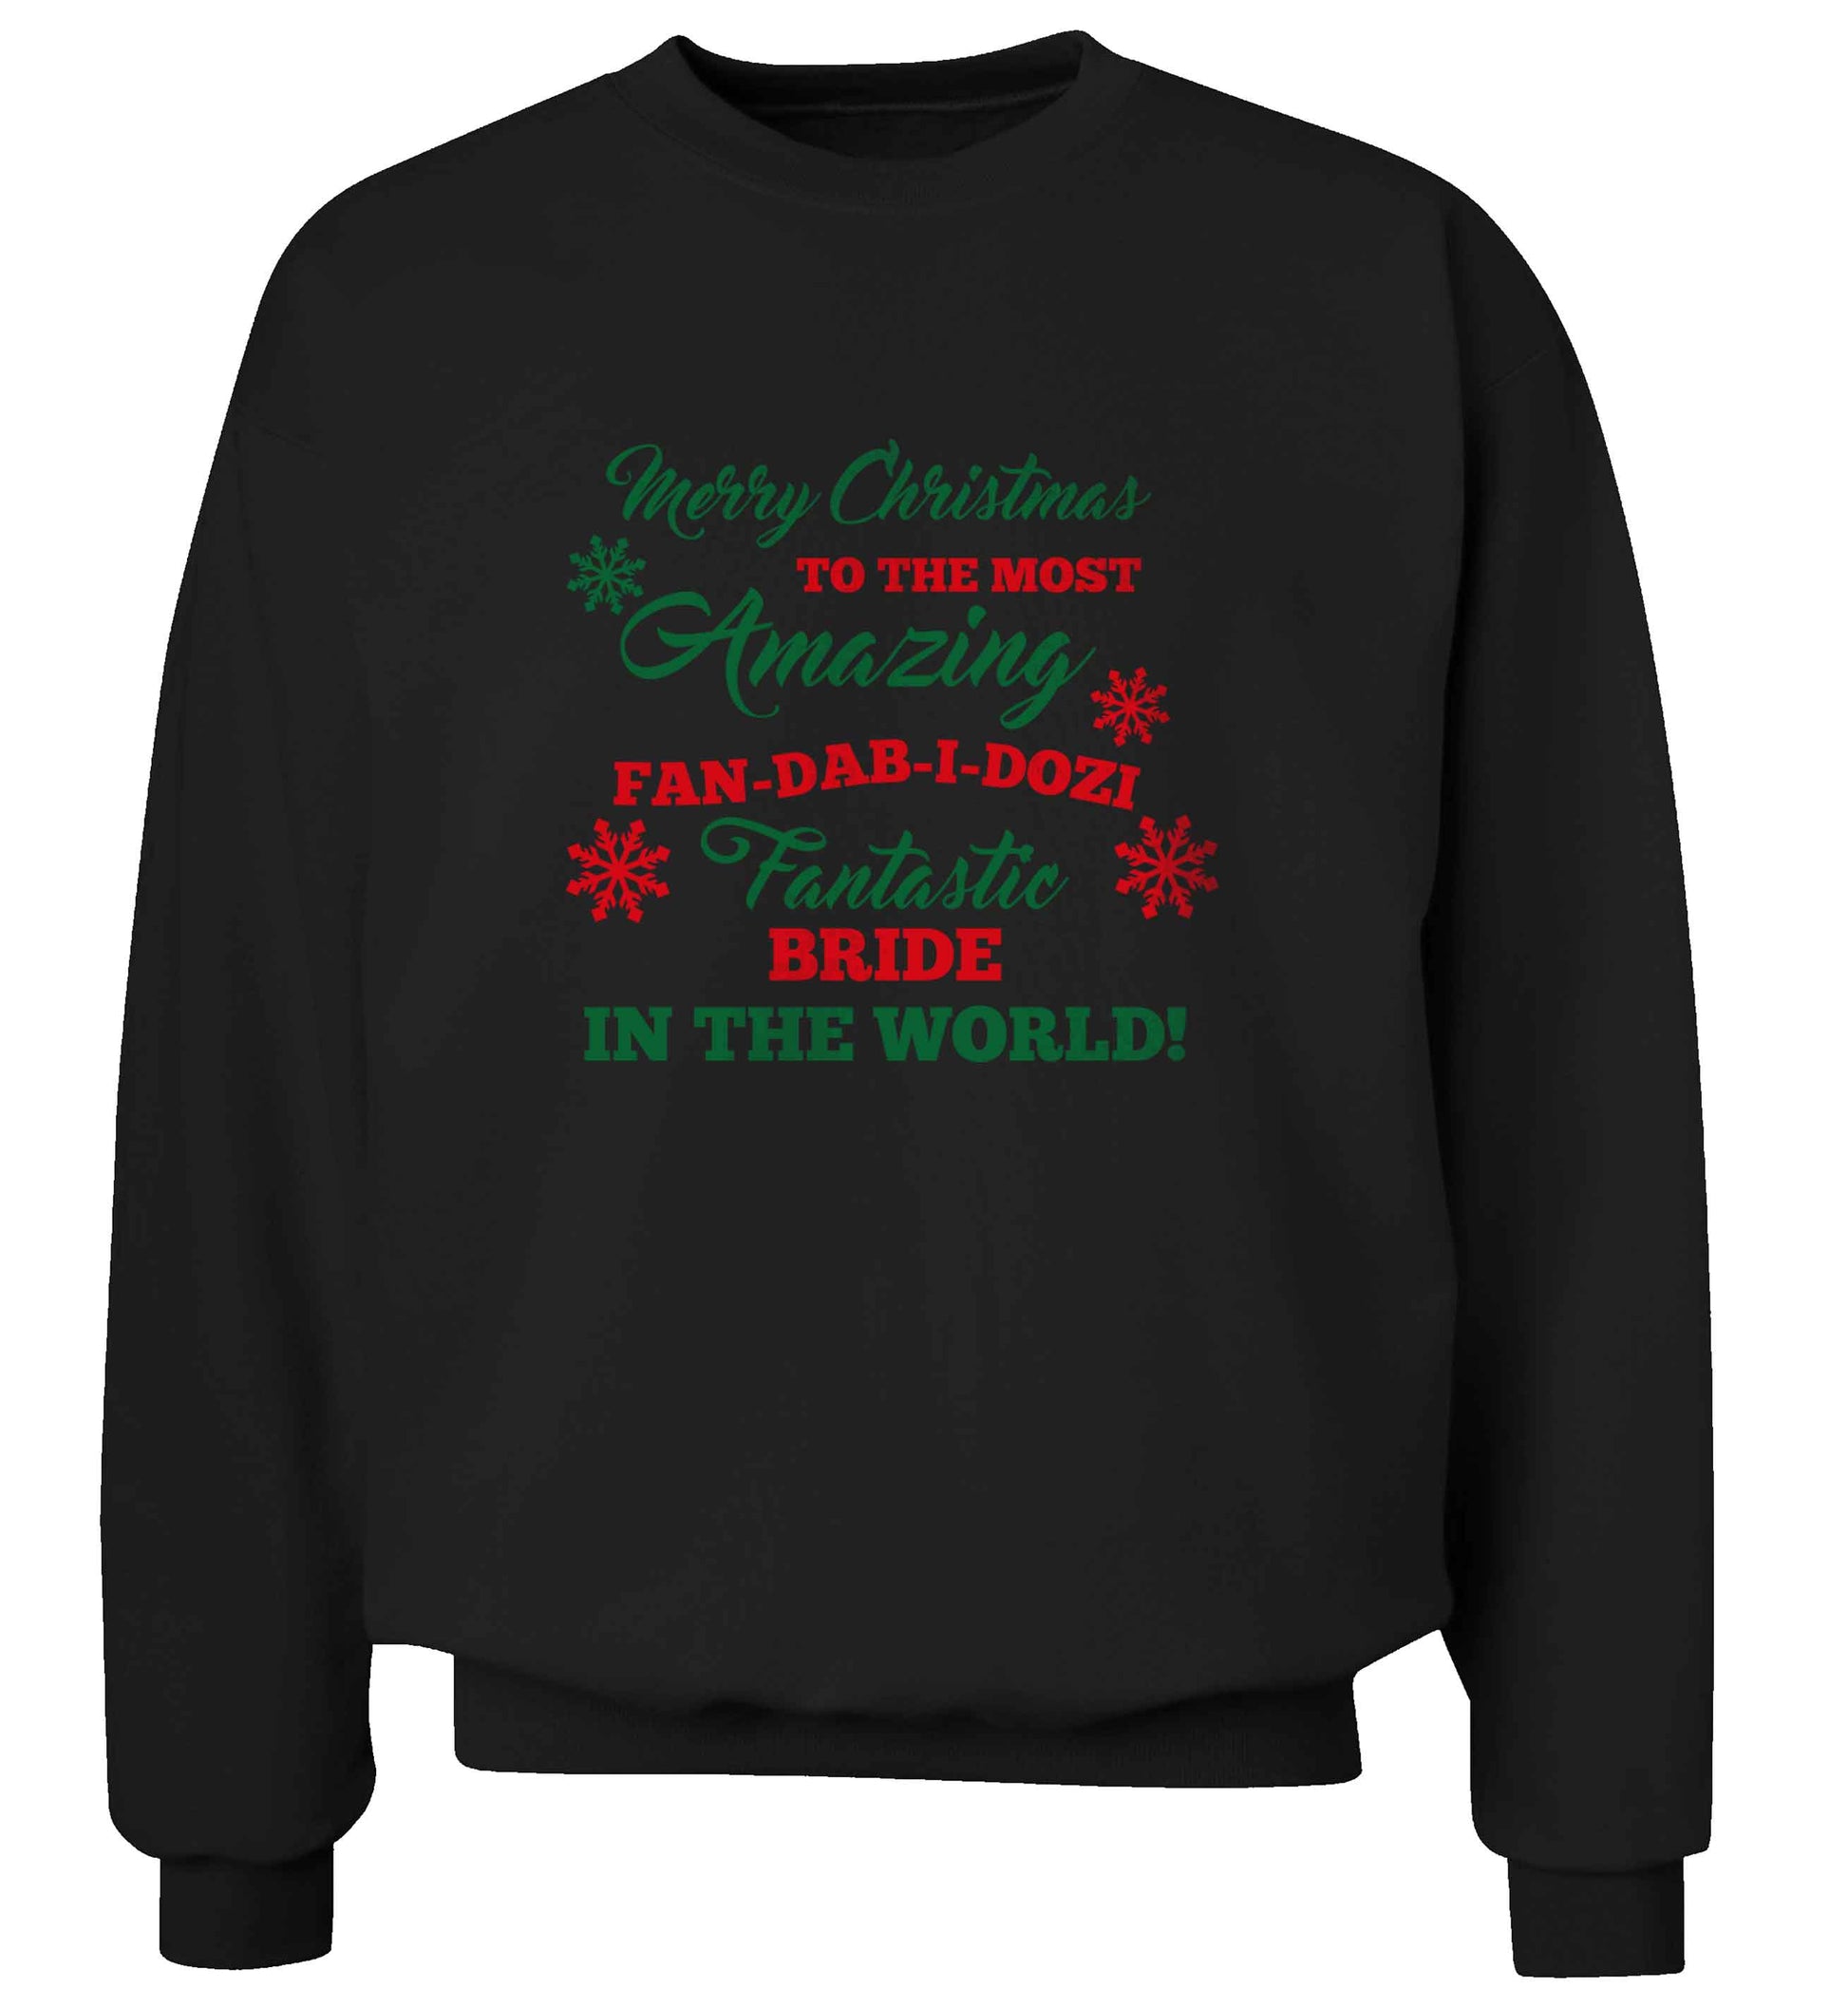 Merry Christmas to the most amazing bride in the world! adult's unisex black sweater 2XL